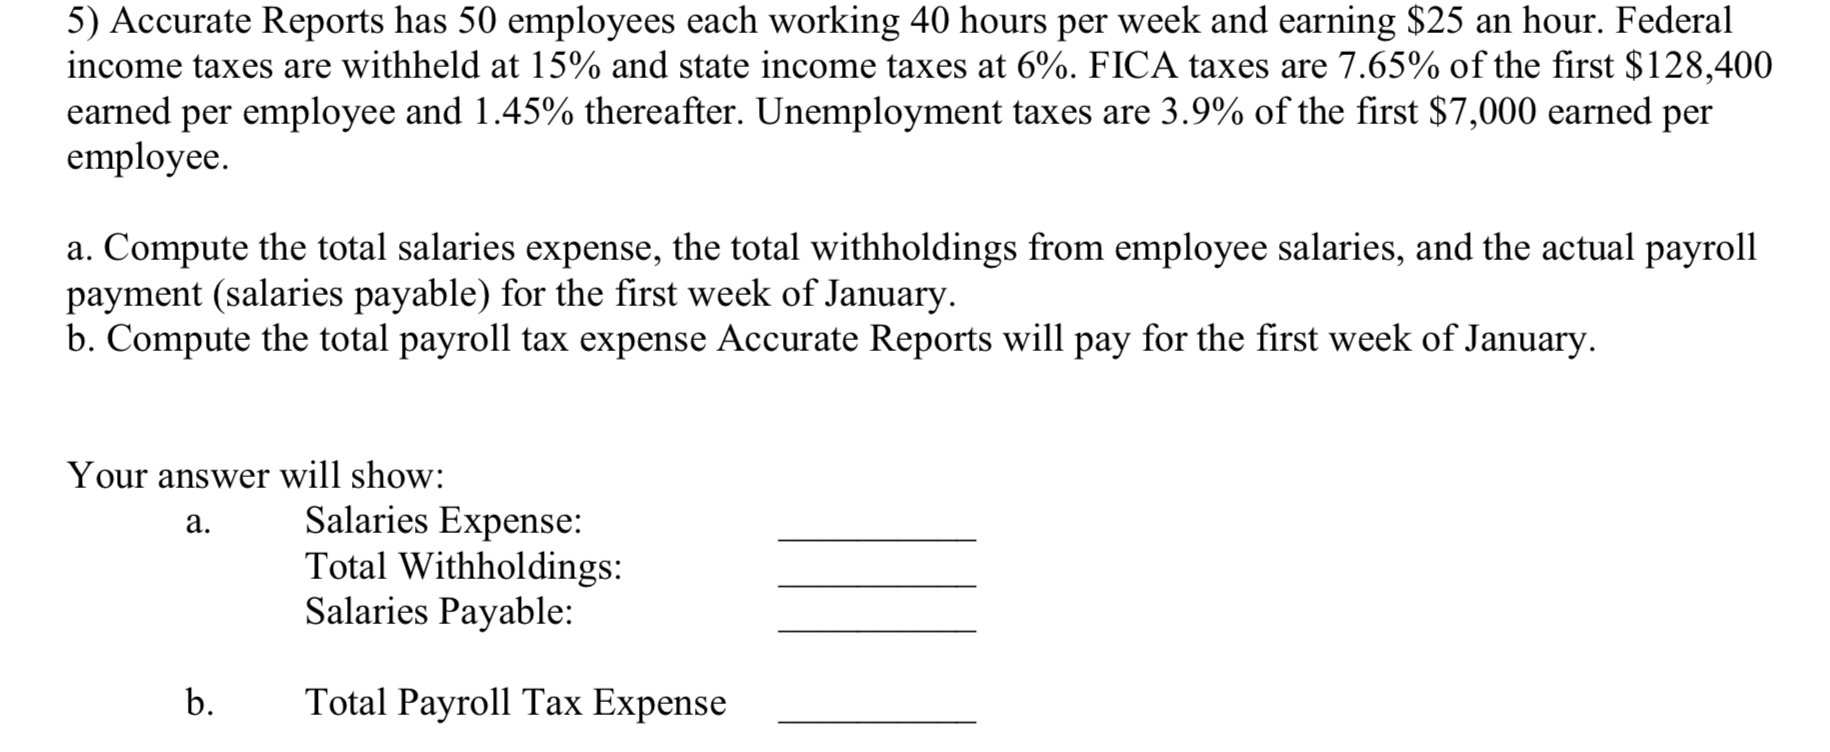 5) Accurate Reports has 50 employees each working 40 hours per week and earning $25 an hour. Federal
income taxes are withheld at 15% and state income taxes at 6%. FICA taxes are 7.65% of the first $128,400
earned per employee and 1.45% thereafter. Unemployment taxes are 3.9% of the first $7,000 earned per
employee.
a. Compute the total salaries expense, the total withholdings from employee salaries, and the actual payroll
payment (salaries payable) for the first week of January.
b. Compute the total payroll tax expense Accurate Reports will pay for the first week of January.
Your answer will show:
Salaries Expense:
Total Withholdings:
Salaries Payable:
a.
b.
Total Payroll Tax Expense
